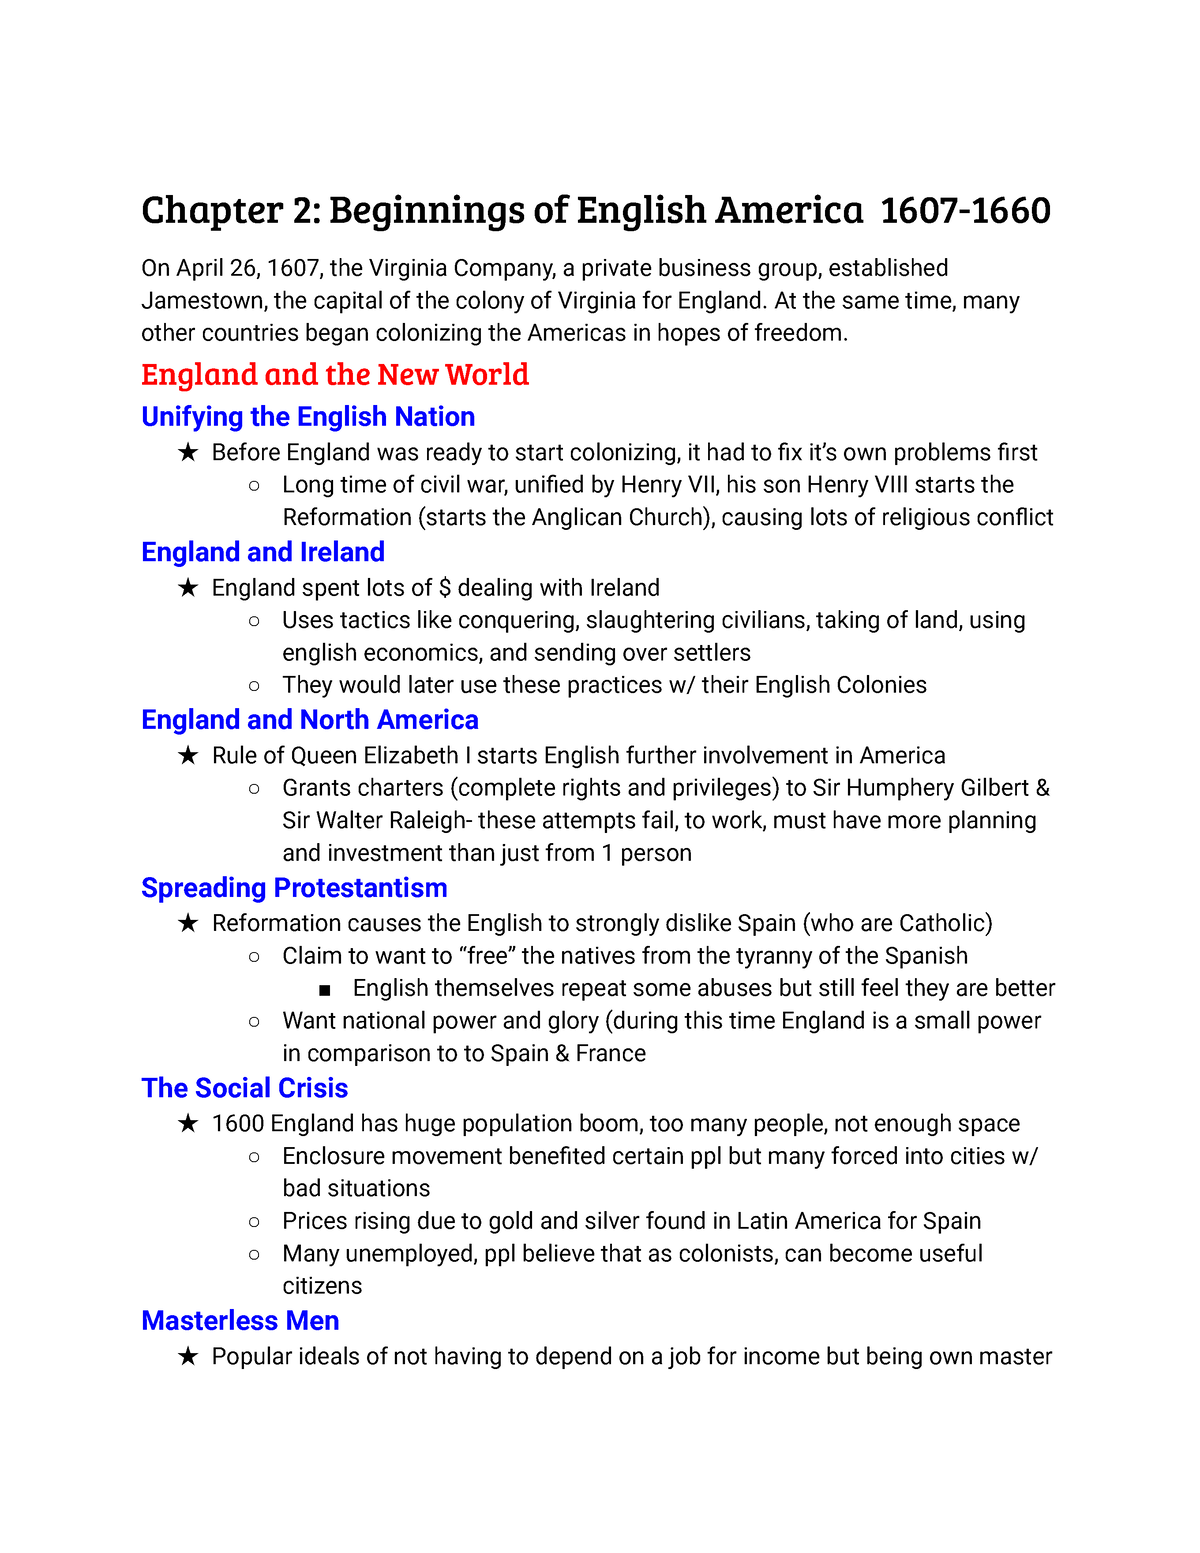 Chapter 2 Introductory Essay: 1607-1763 - Bill of Rights Institute